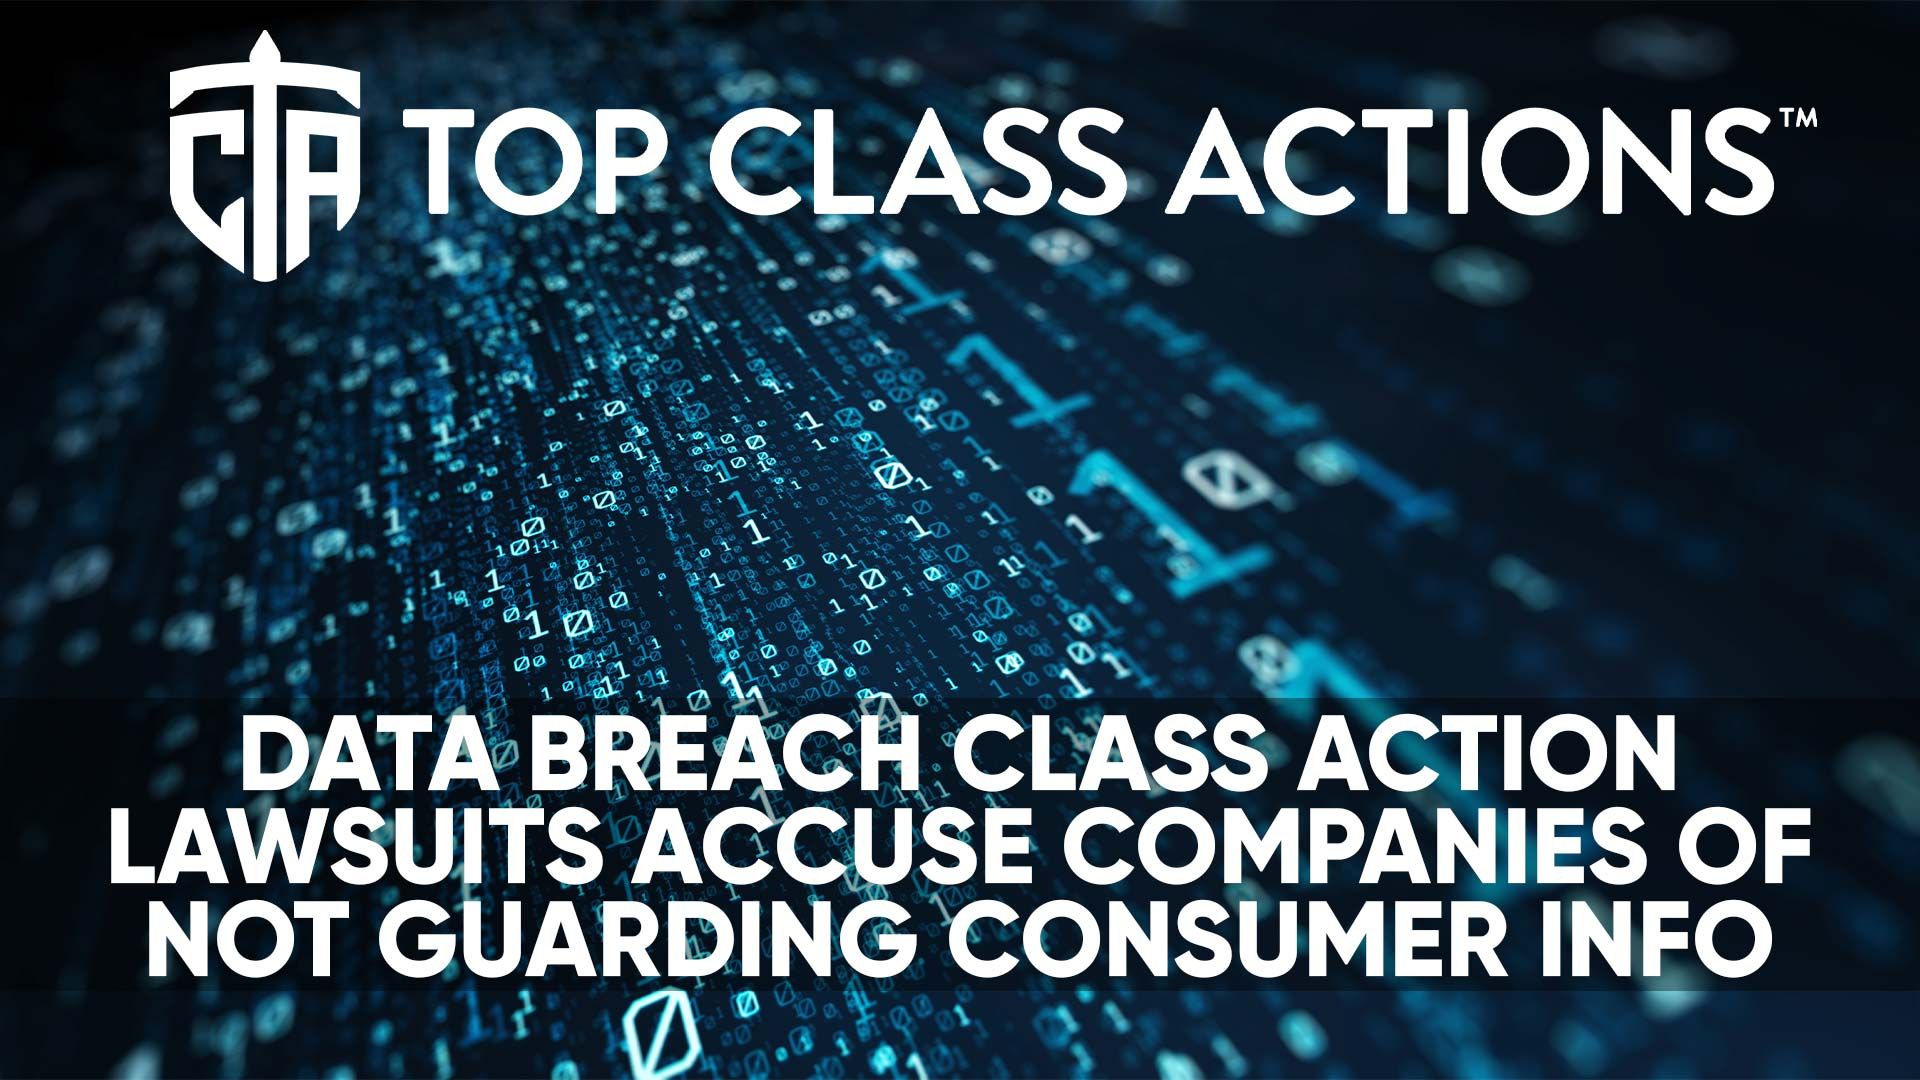 Data breach class action lawsuits accuse companies of not guarding consumer info